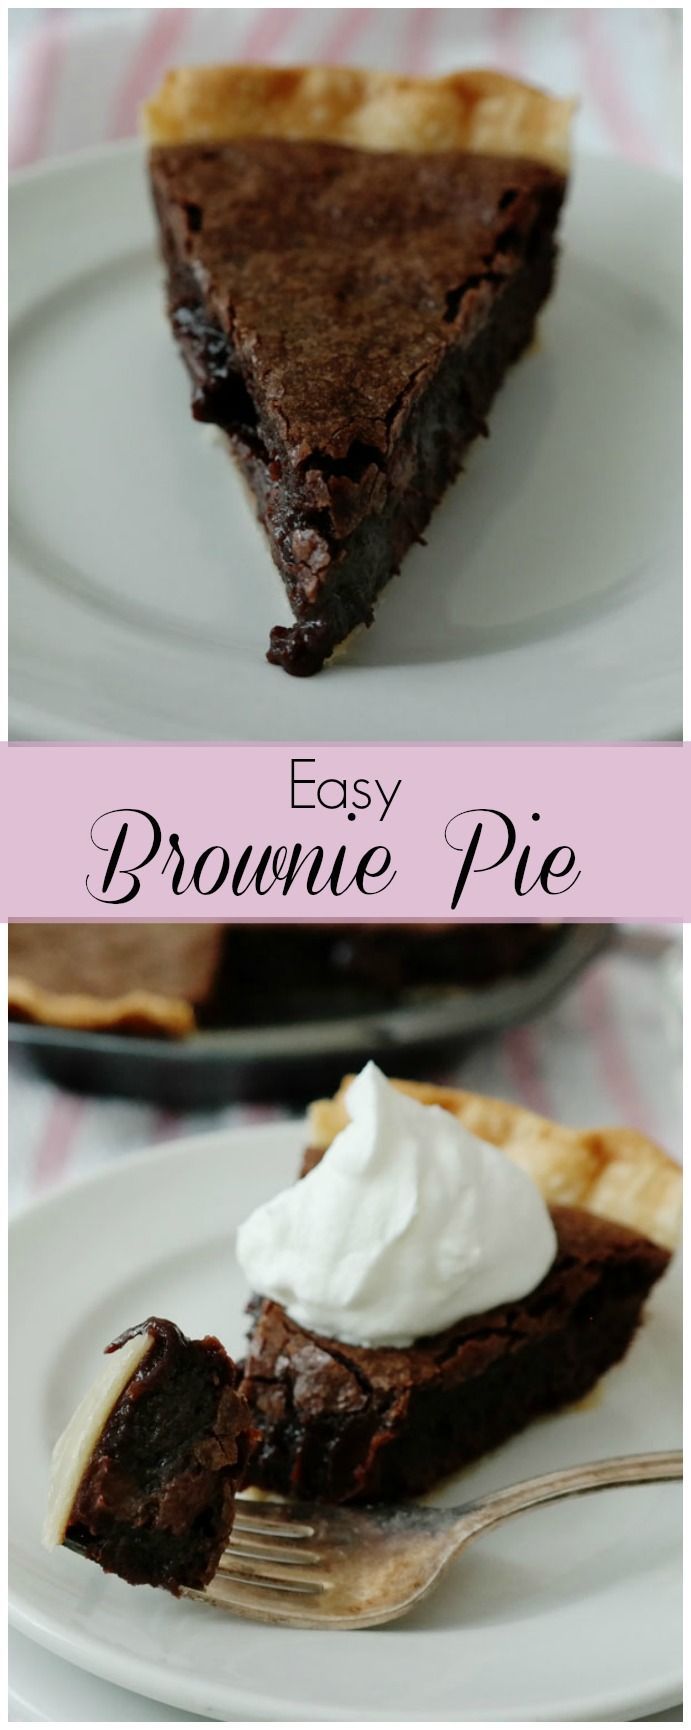 Easy Brownie Pie-taking brownies to the next level and creating an easy dessert-a flaky pie crust surrounds a rich brownie with a